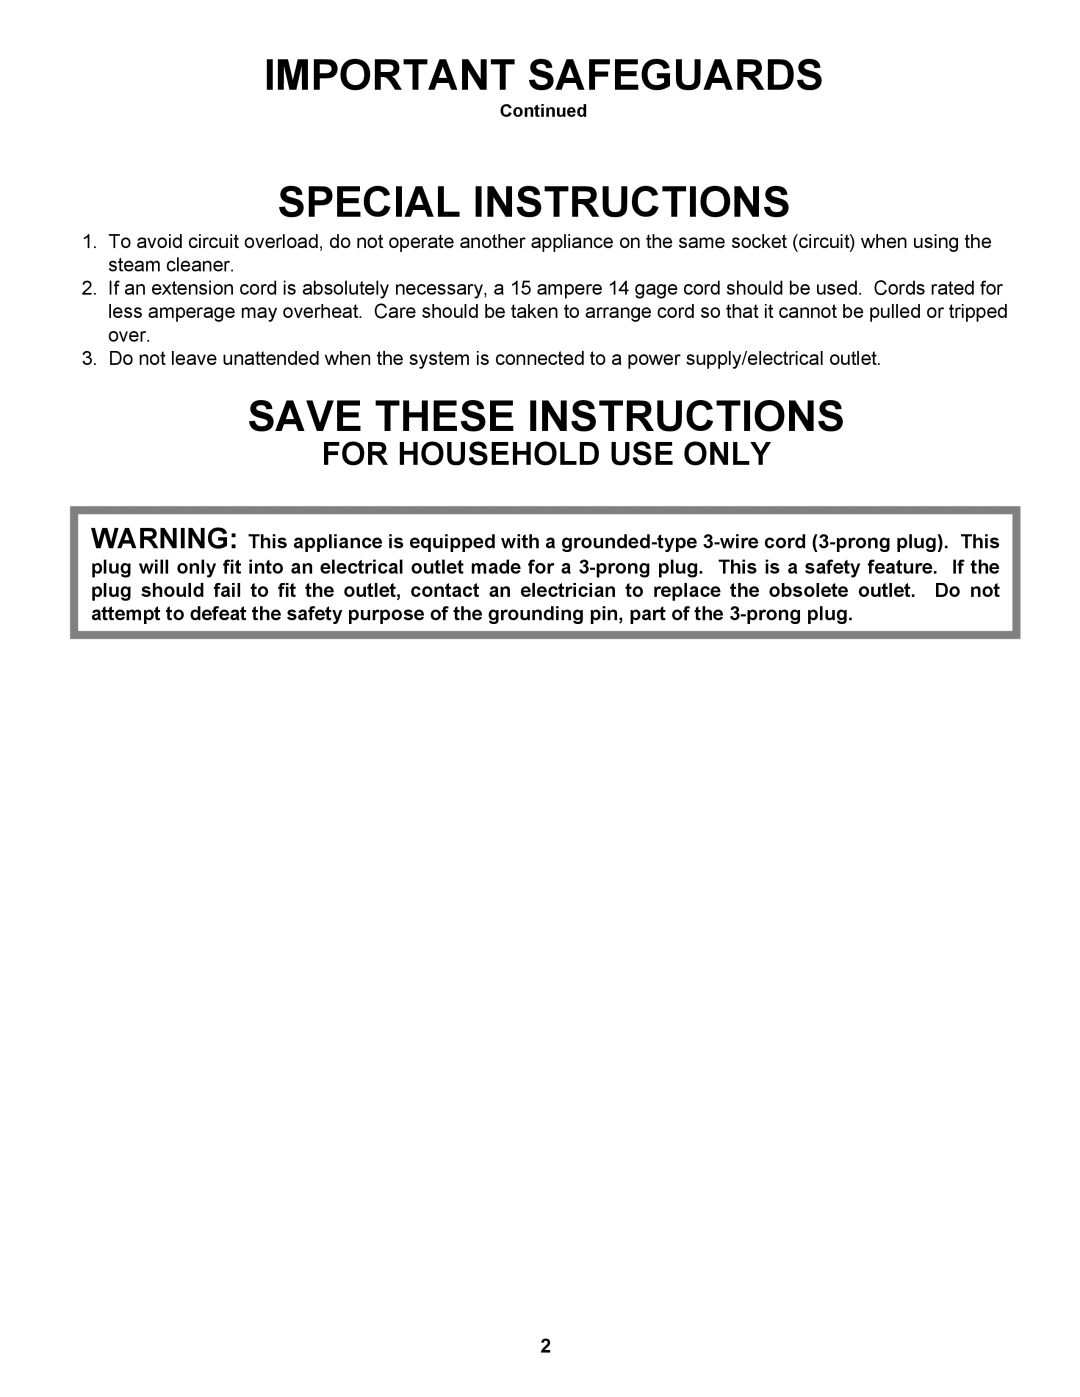 Euro-Pro EP961 Special Instructions, For Household Use Only, Important Safeguards, Save These Instructions, Continued 